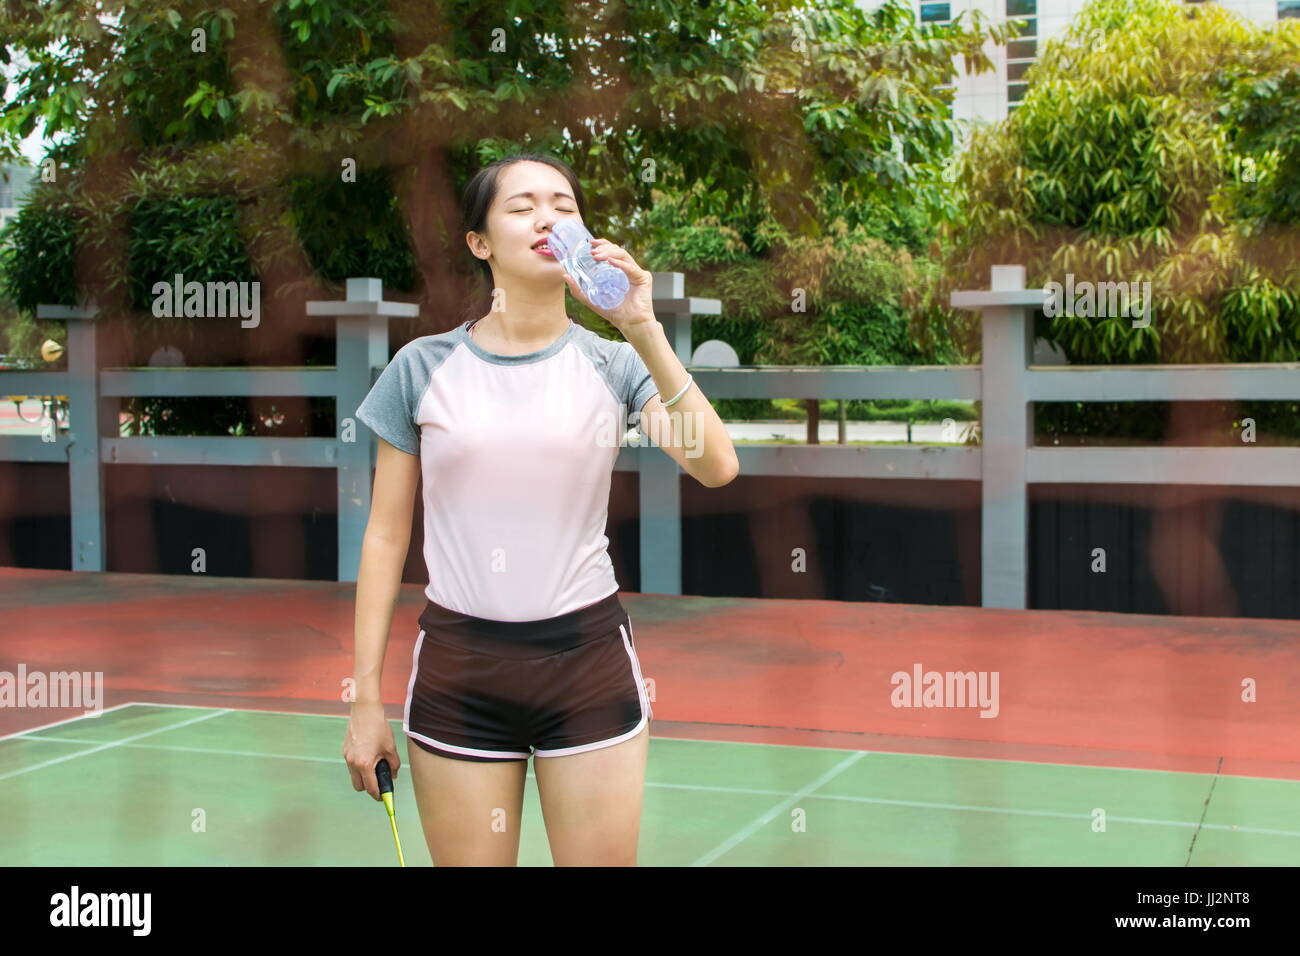 Badminton player wiping sweat on the outdoors court Stock Photo